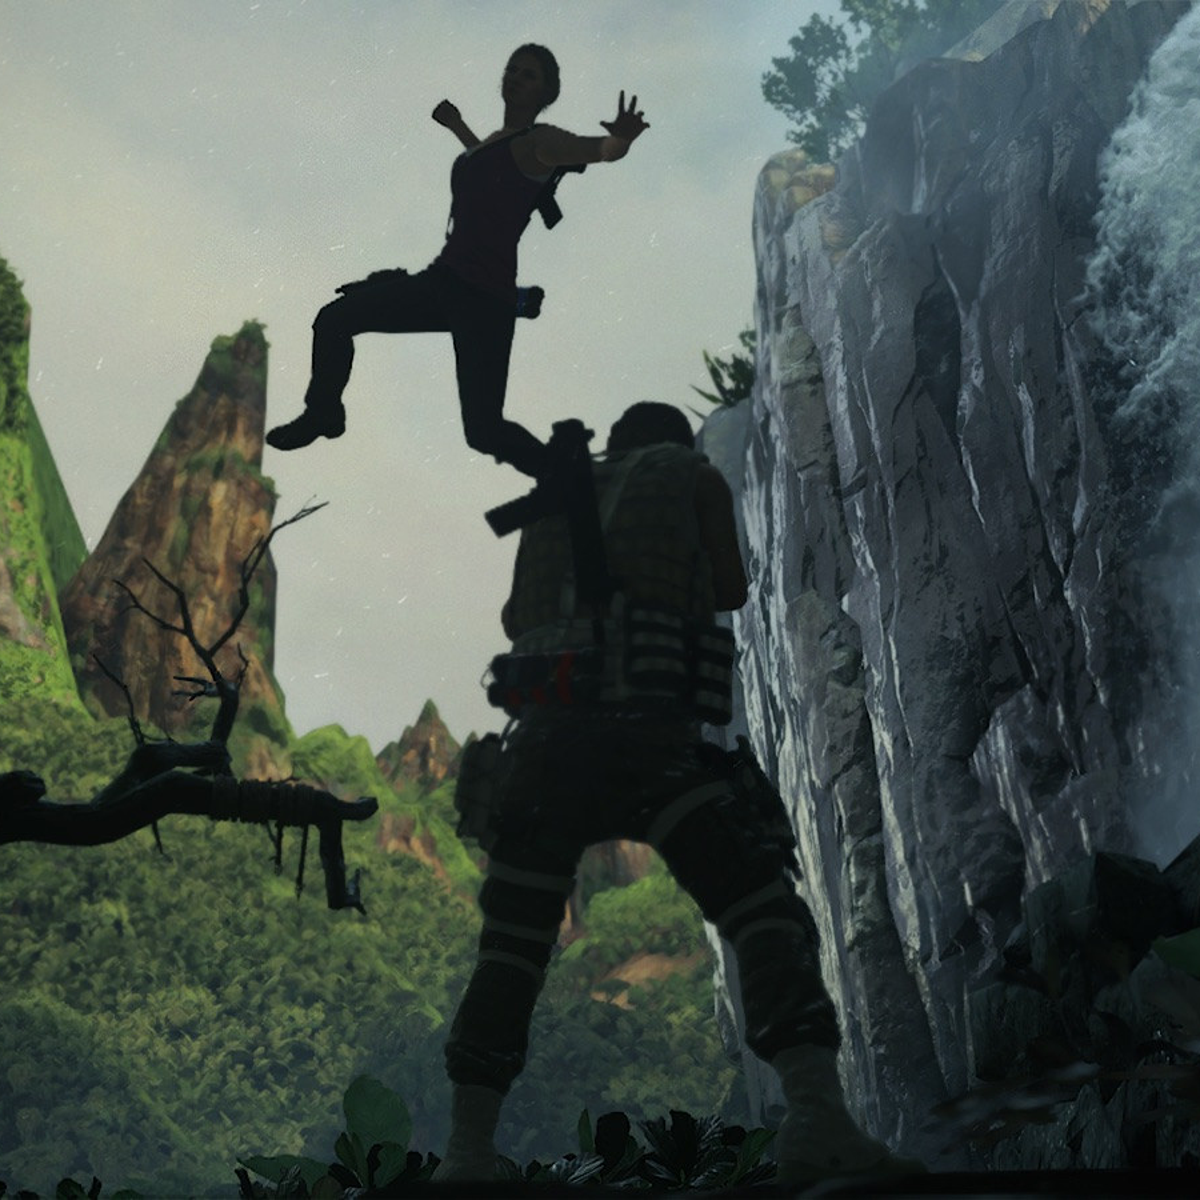 Uncharted 4 beta gameplay is here: hot, fast and brutal